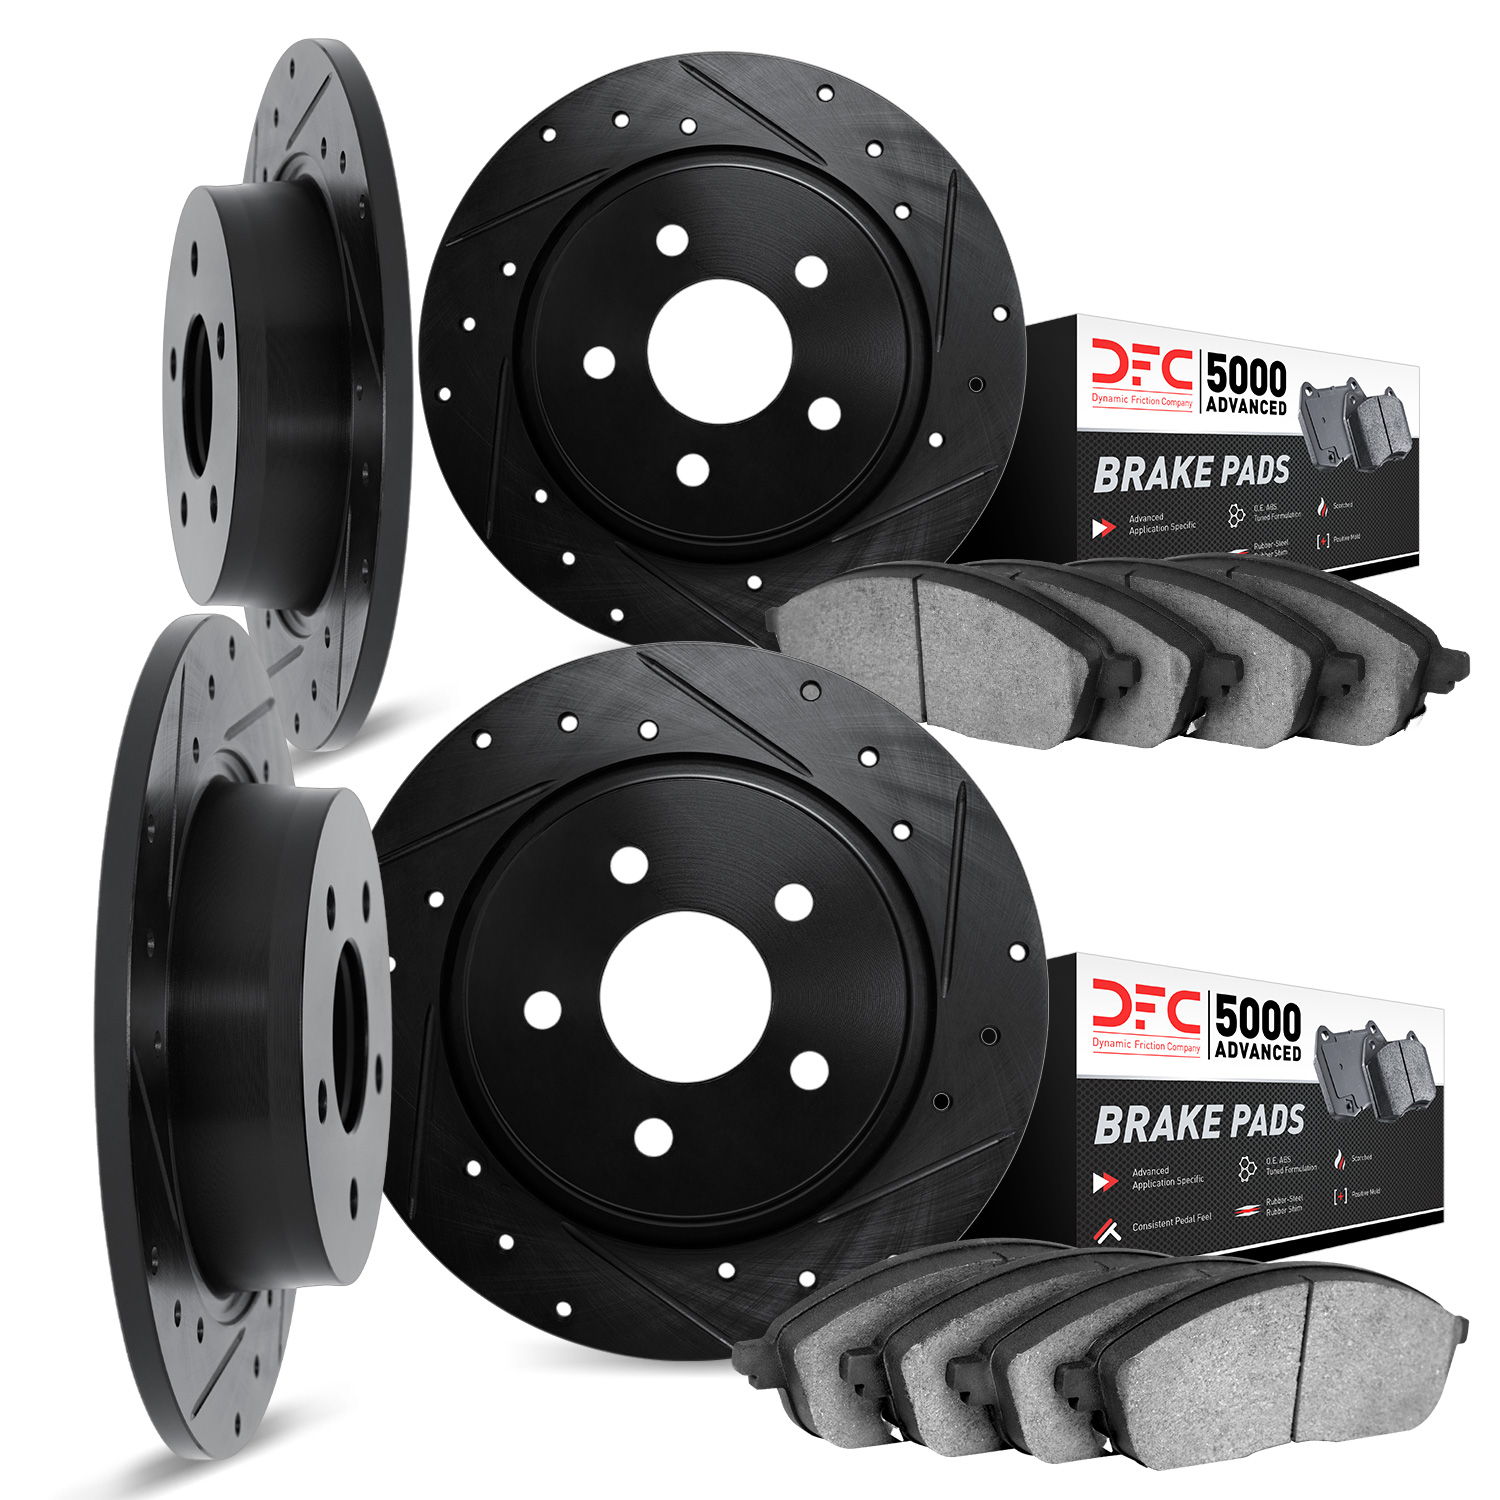 8504-27000 Drilled/Slotted Brake Rotors w/5000 Advanced Brake Pads Kit [Black], 1975-1987 Volvo, Position: Front and Rear